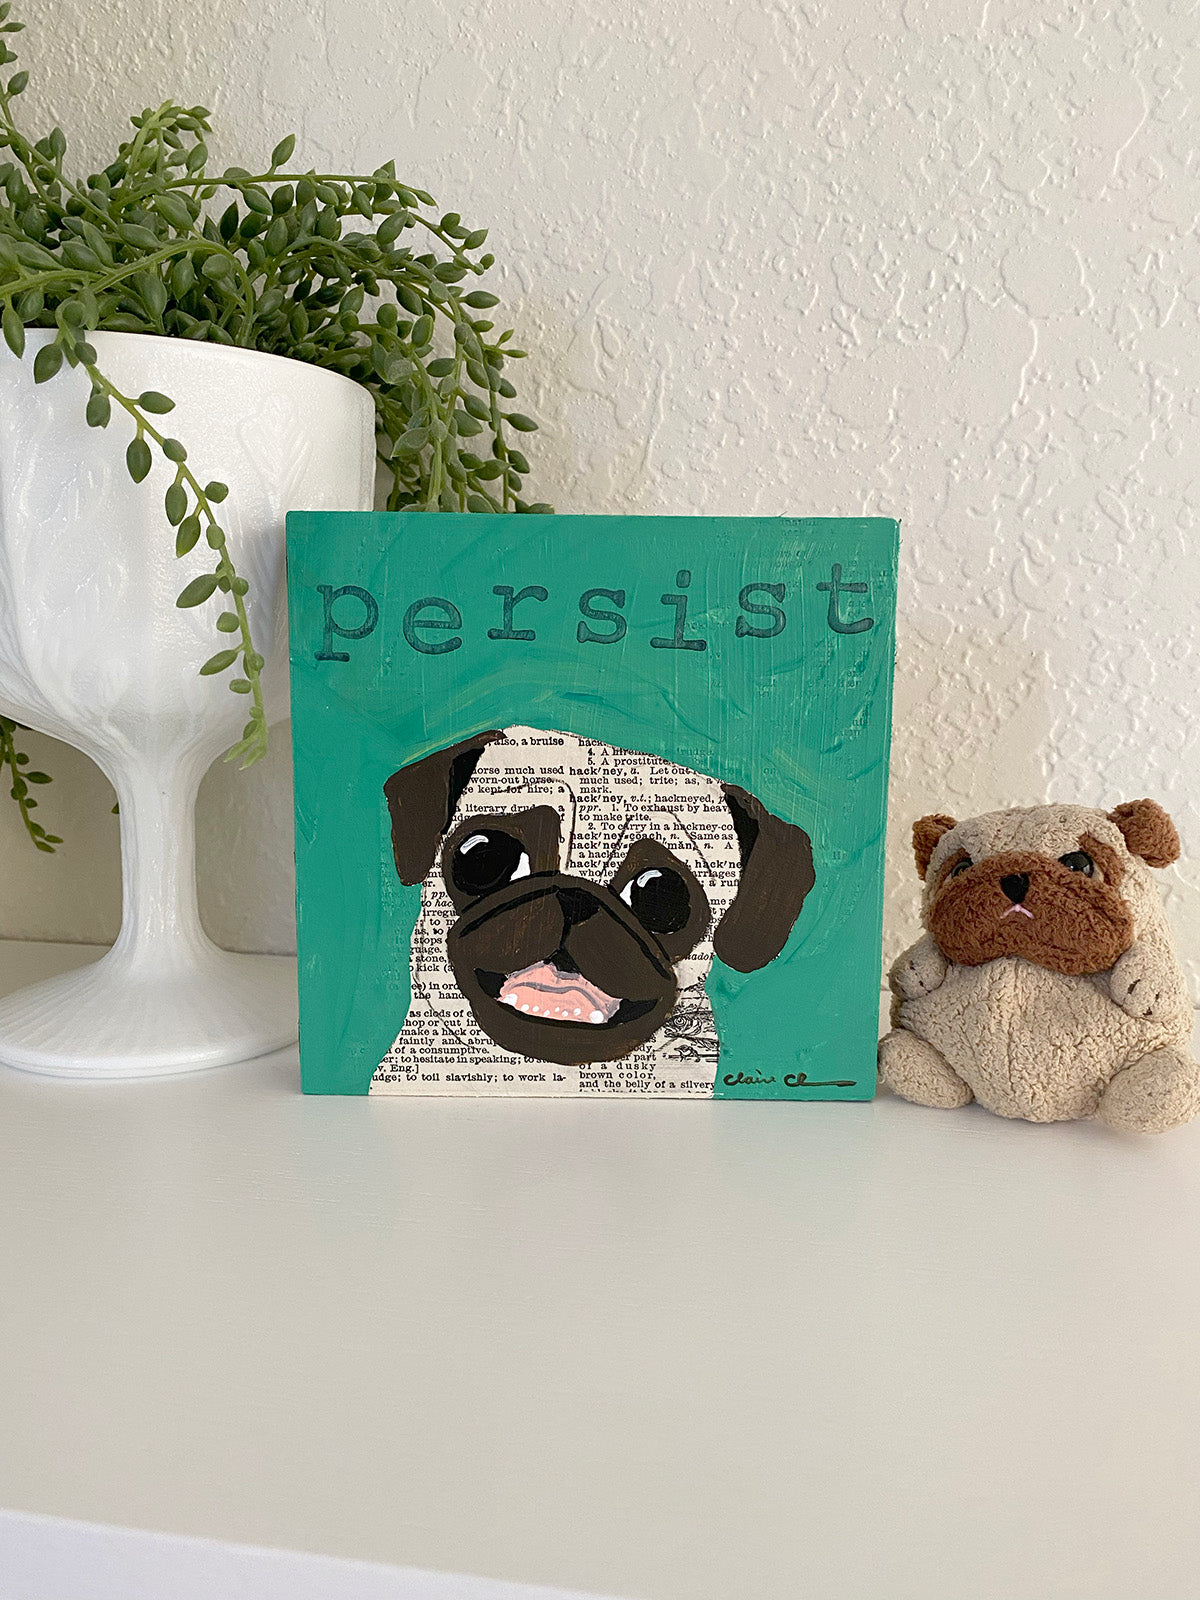 Persist - Original Word of the Year Painting